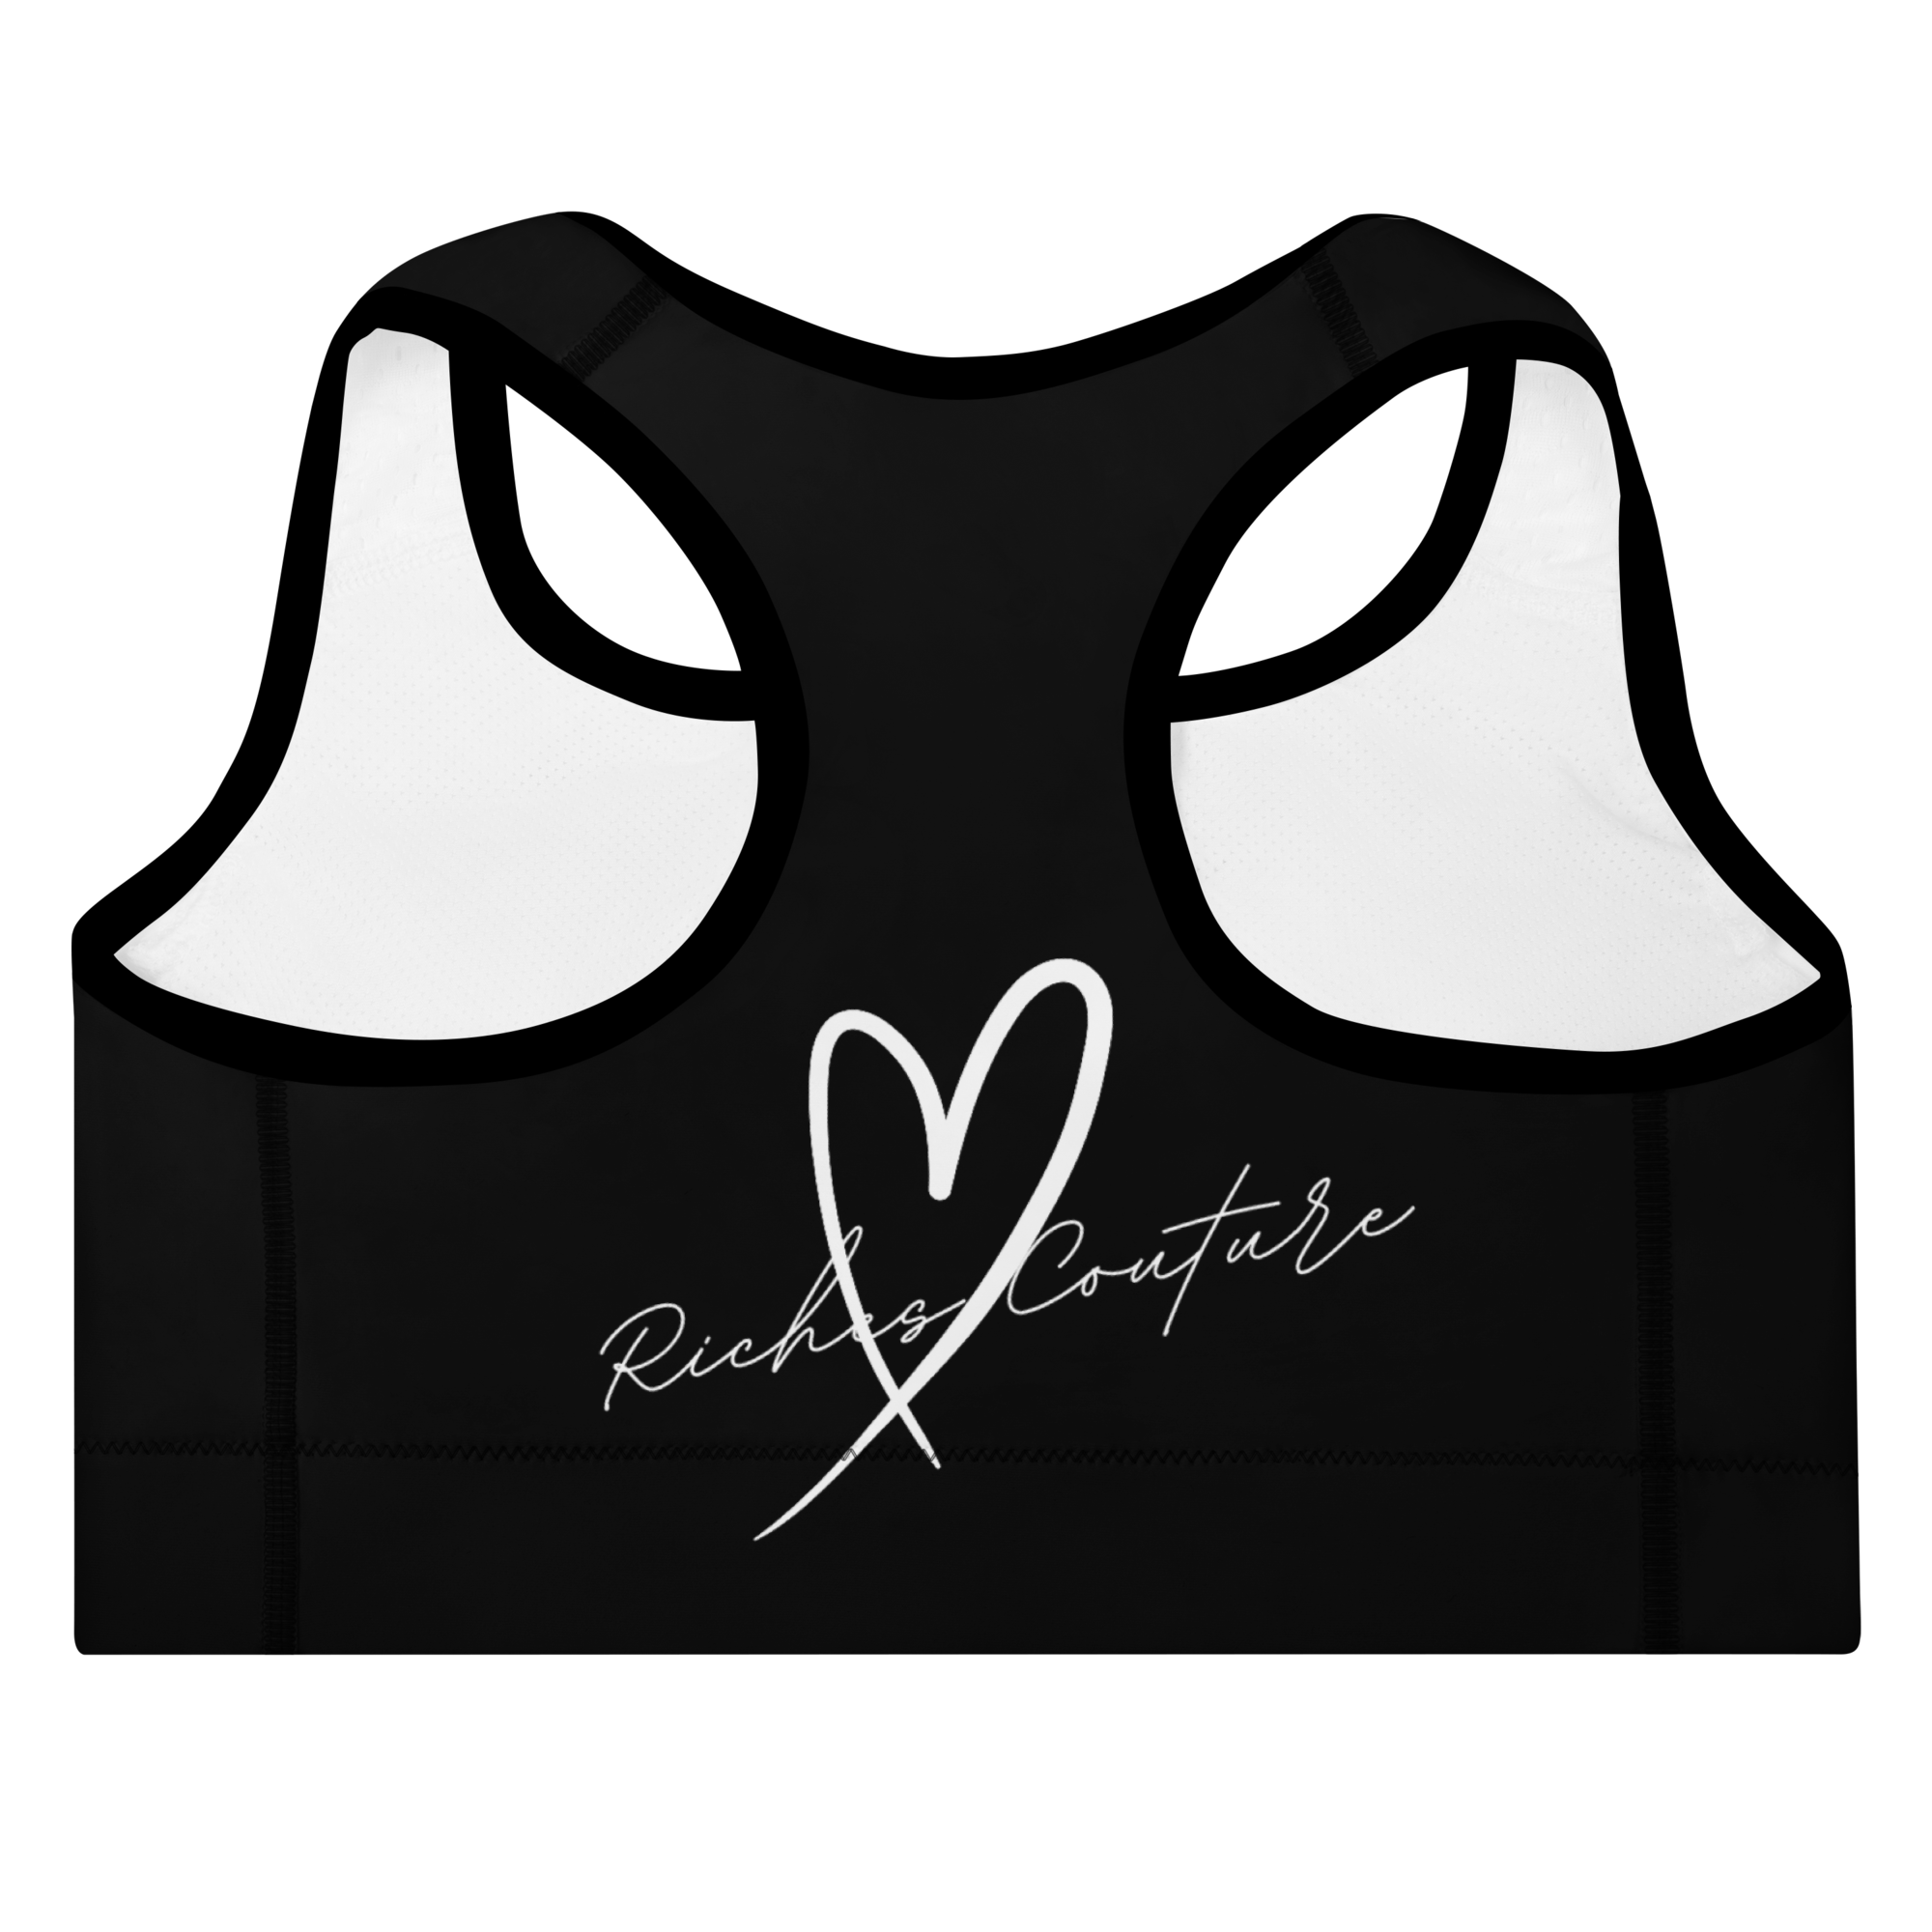 Luxe Comfort Padded Sports Bra